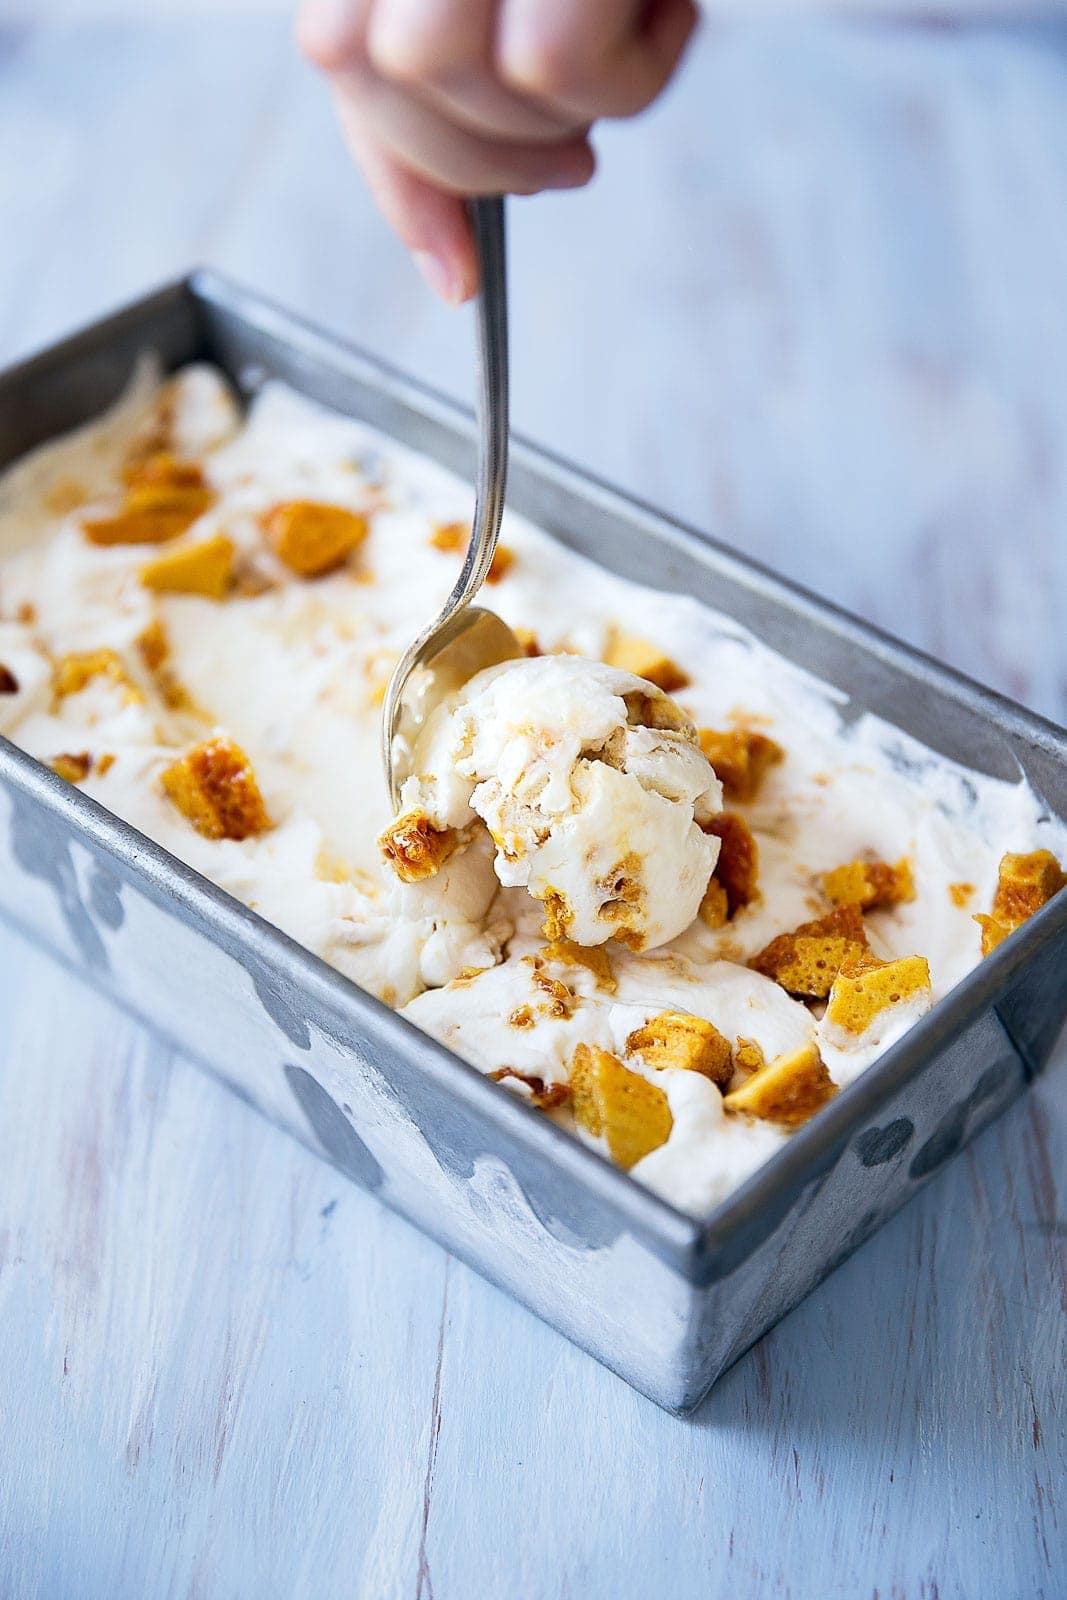 A no-churn maple honeycomb ice cream that takes just minutes to whip up!